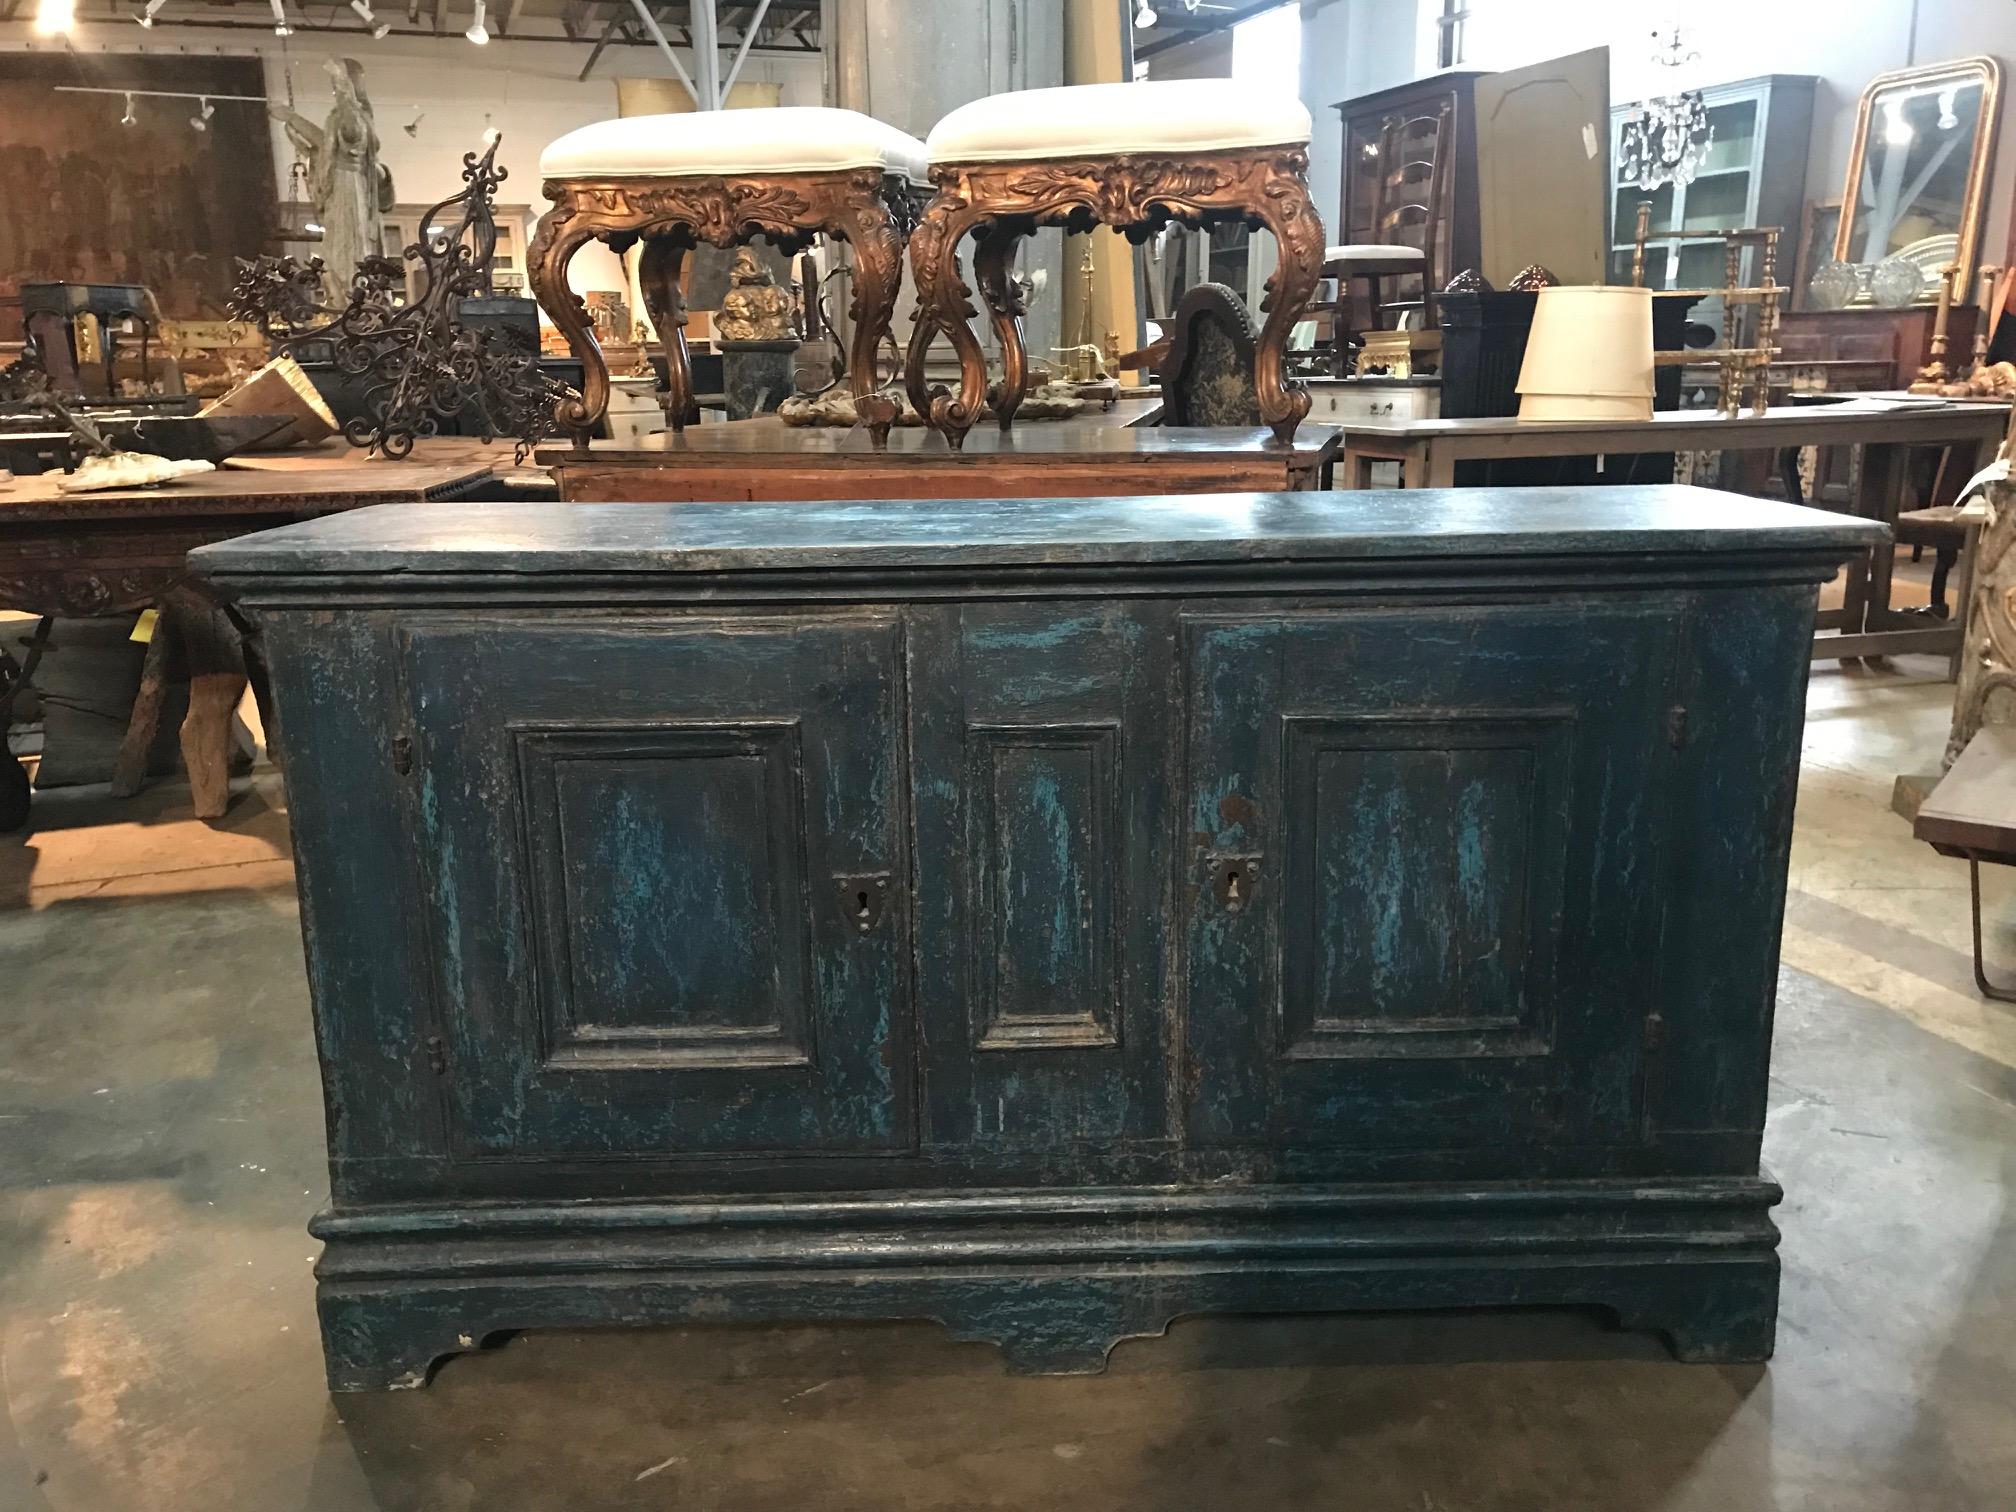 A wonderful 18th century buffet cabinet from the Catalan region of Spain. Soundly constructed from very thick planks of painted oak. Terrific painted finish in hues from azure to turquoise. A wonderful storage piece that will add charm and character